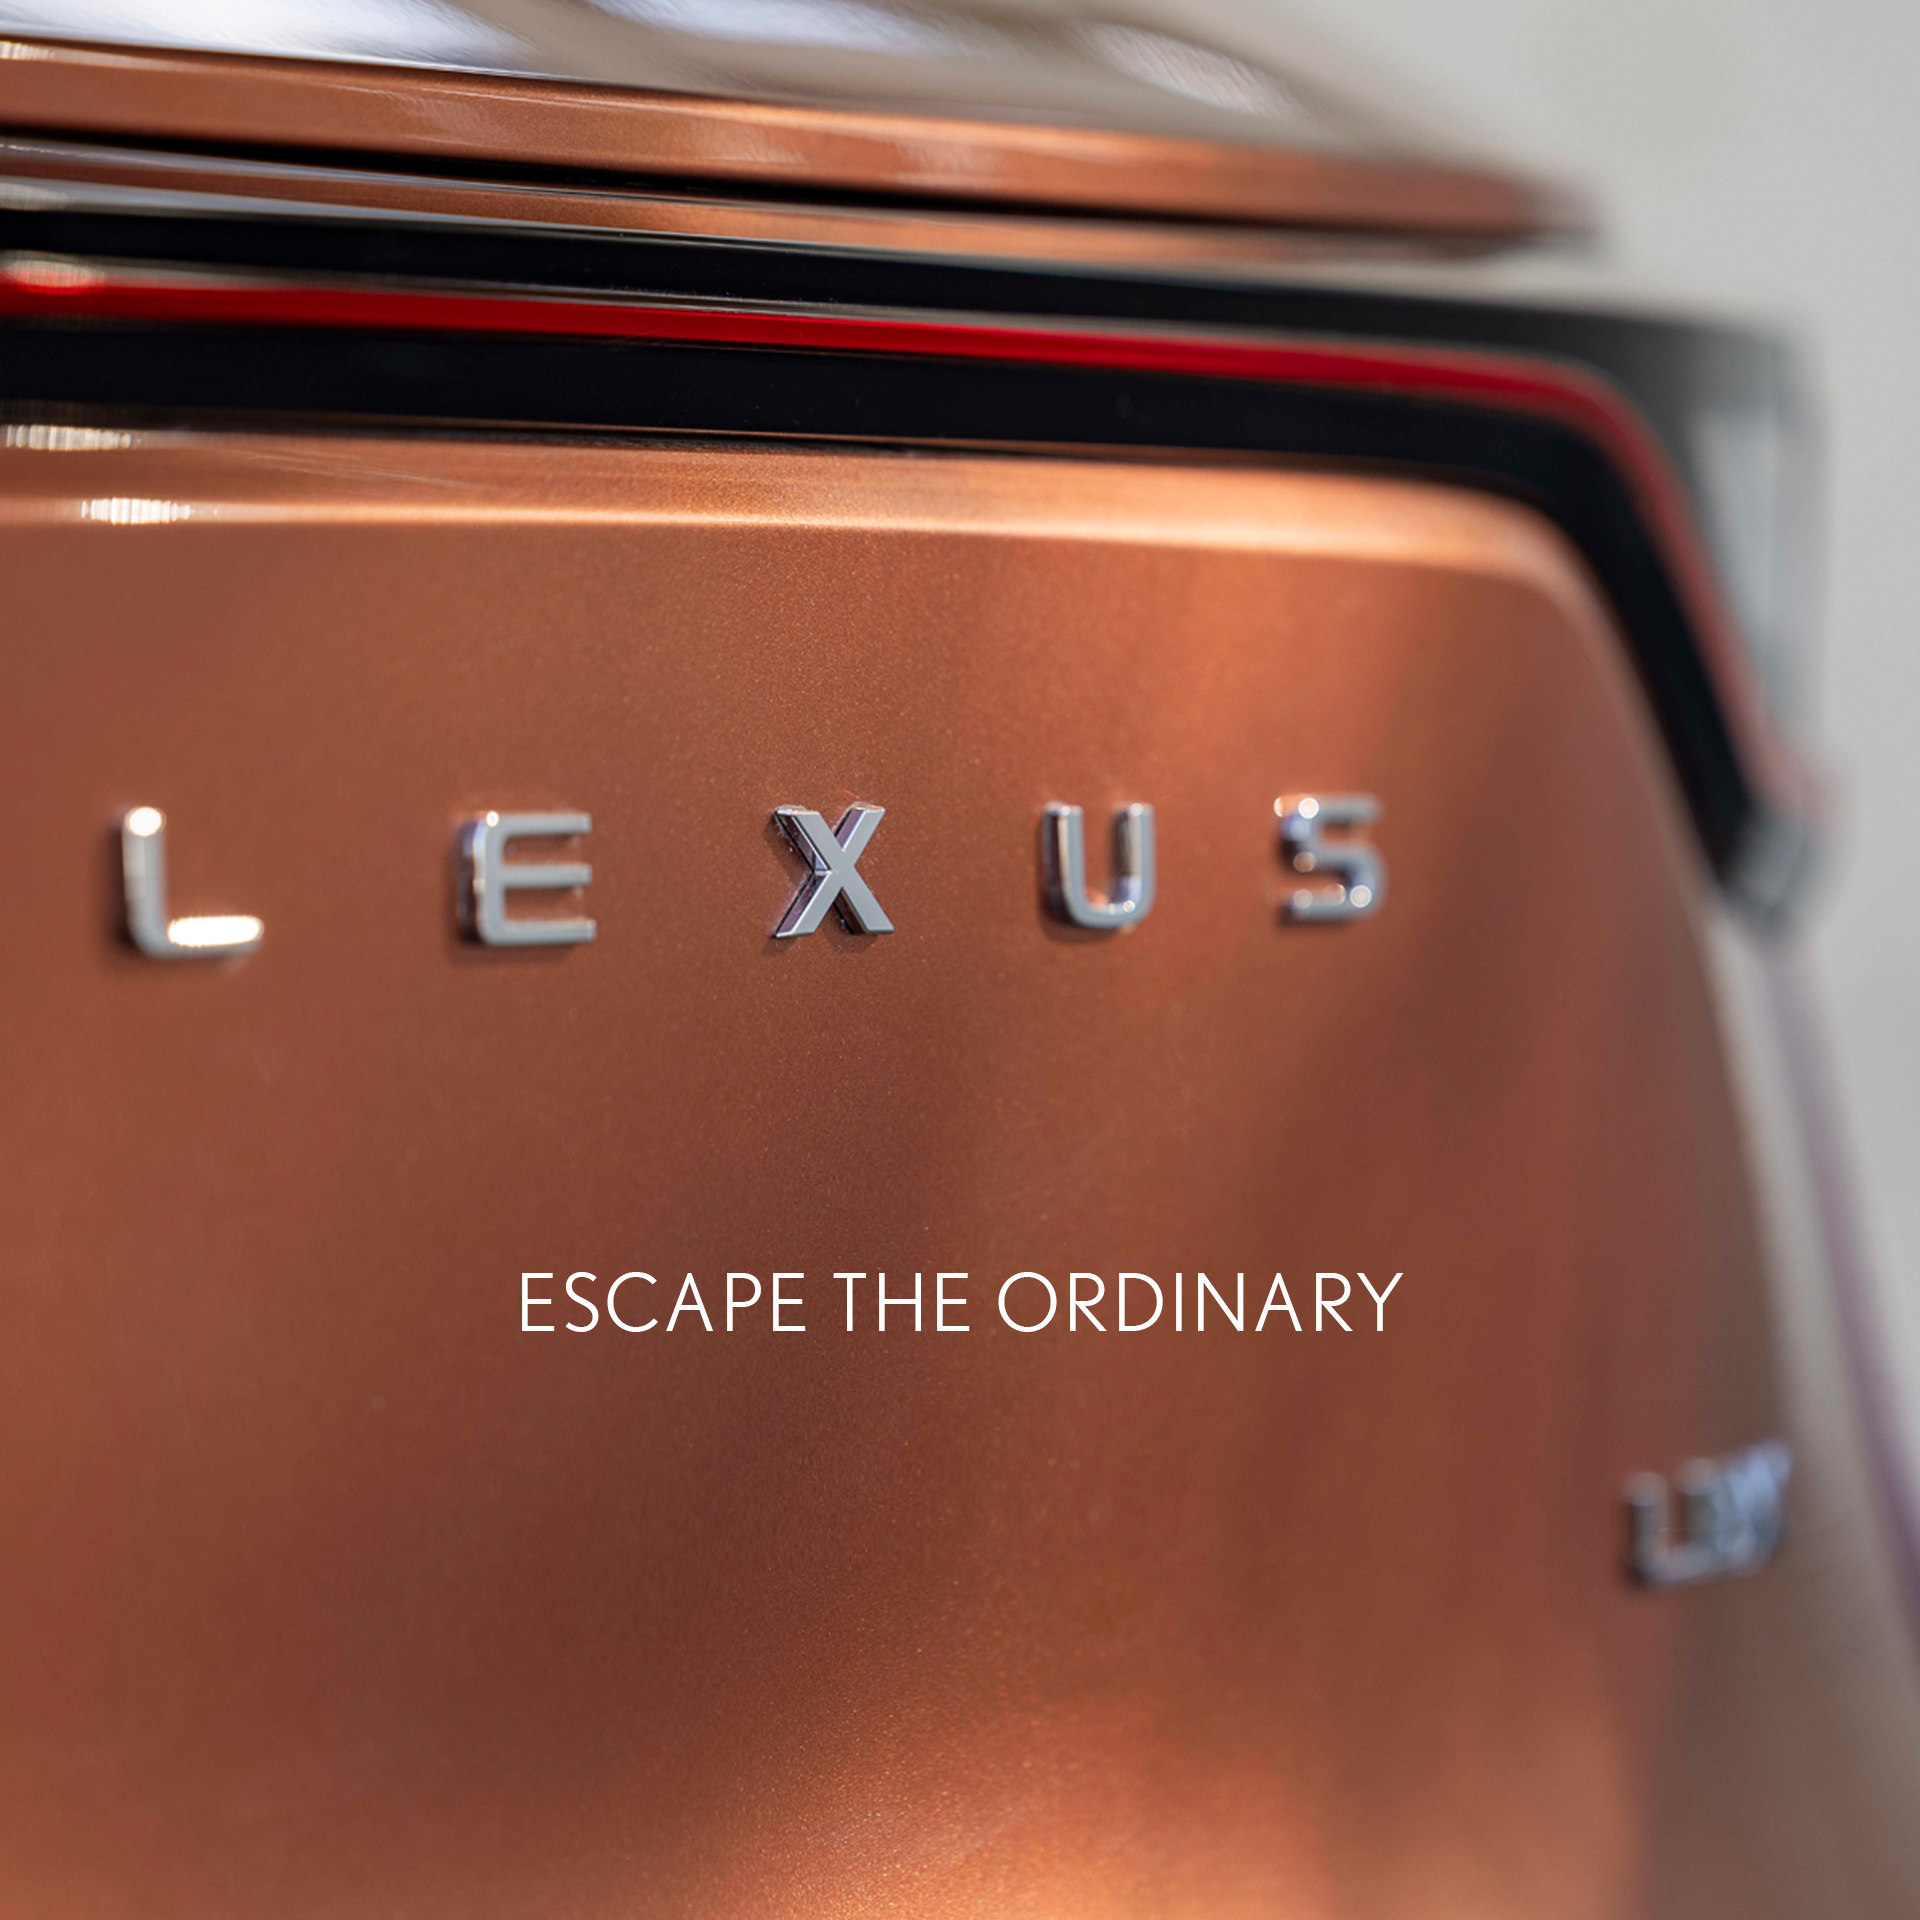 is the smallest lexus ever on its way to ph?